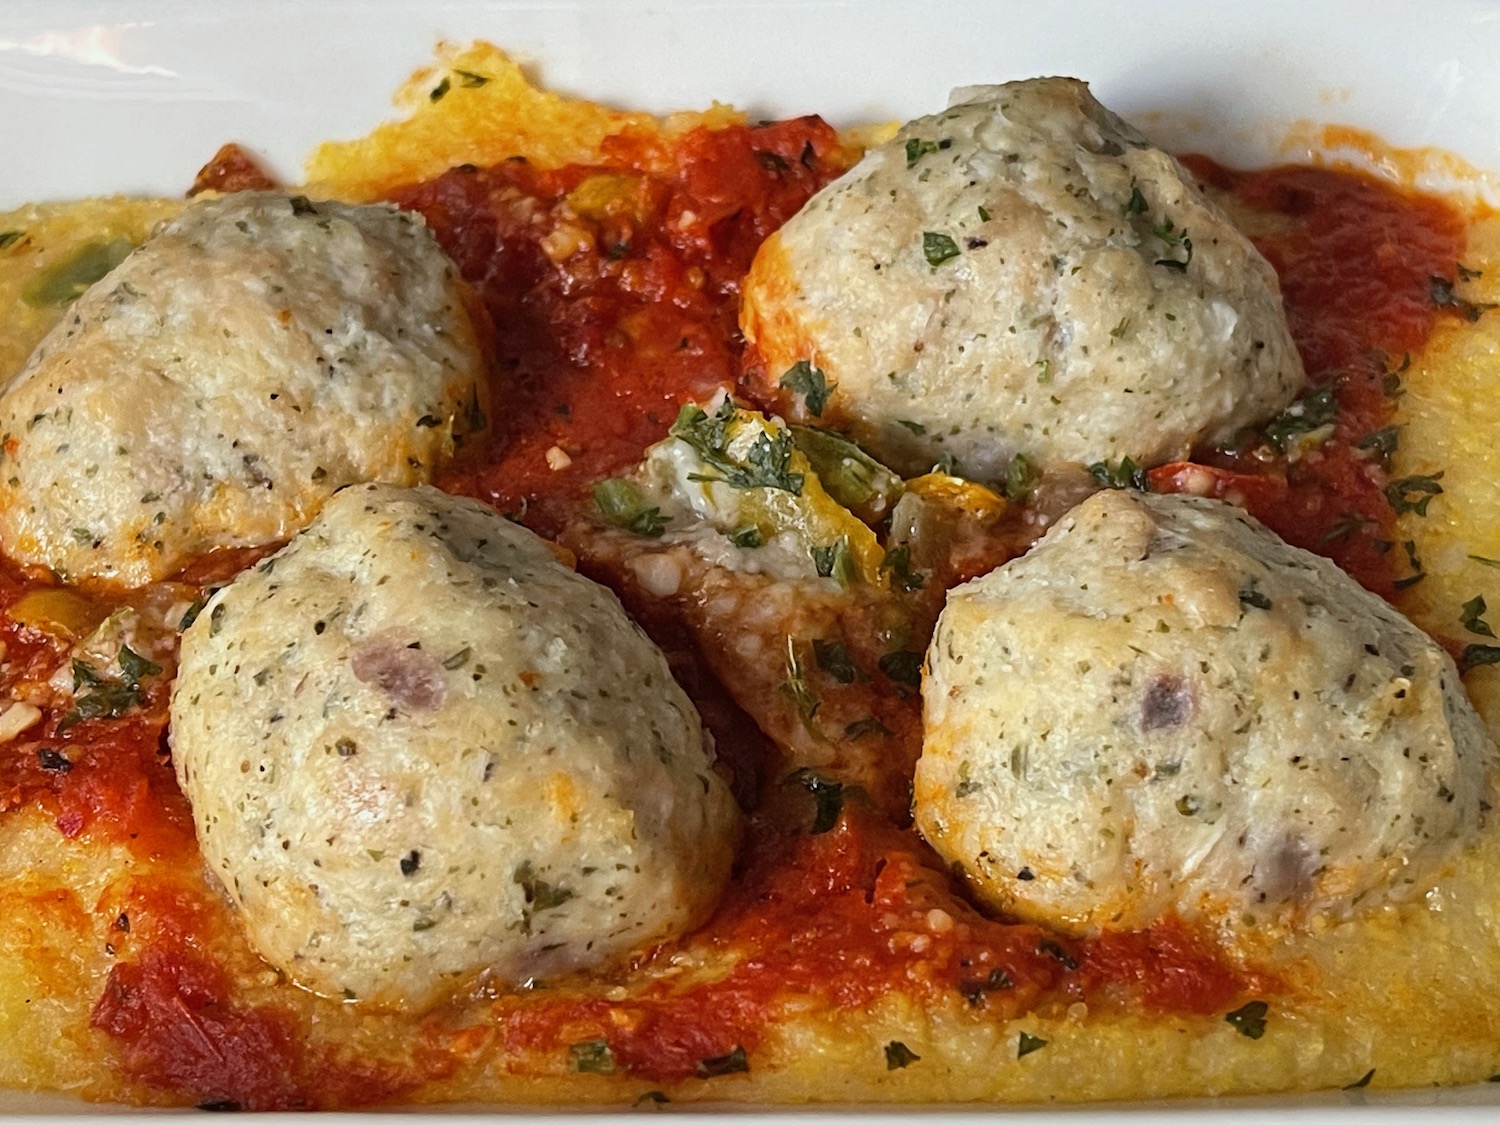 a plate of food with meatballs on it